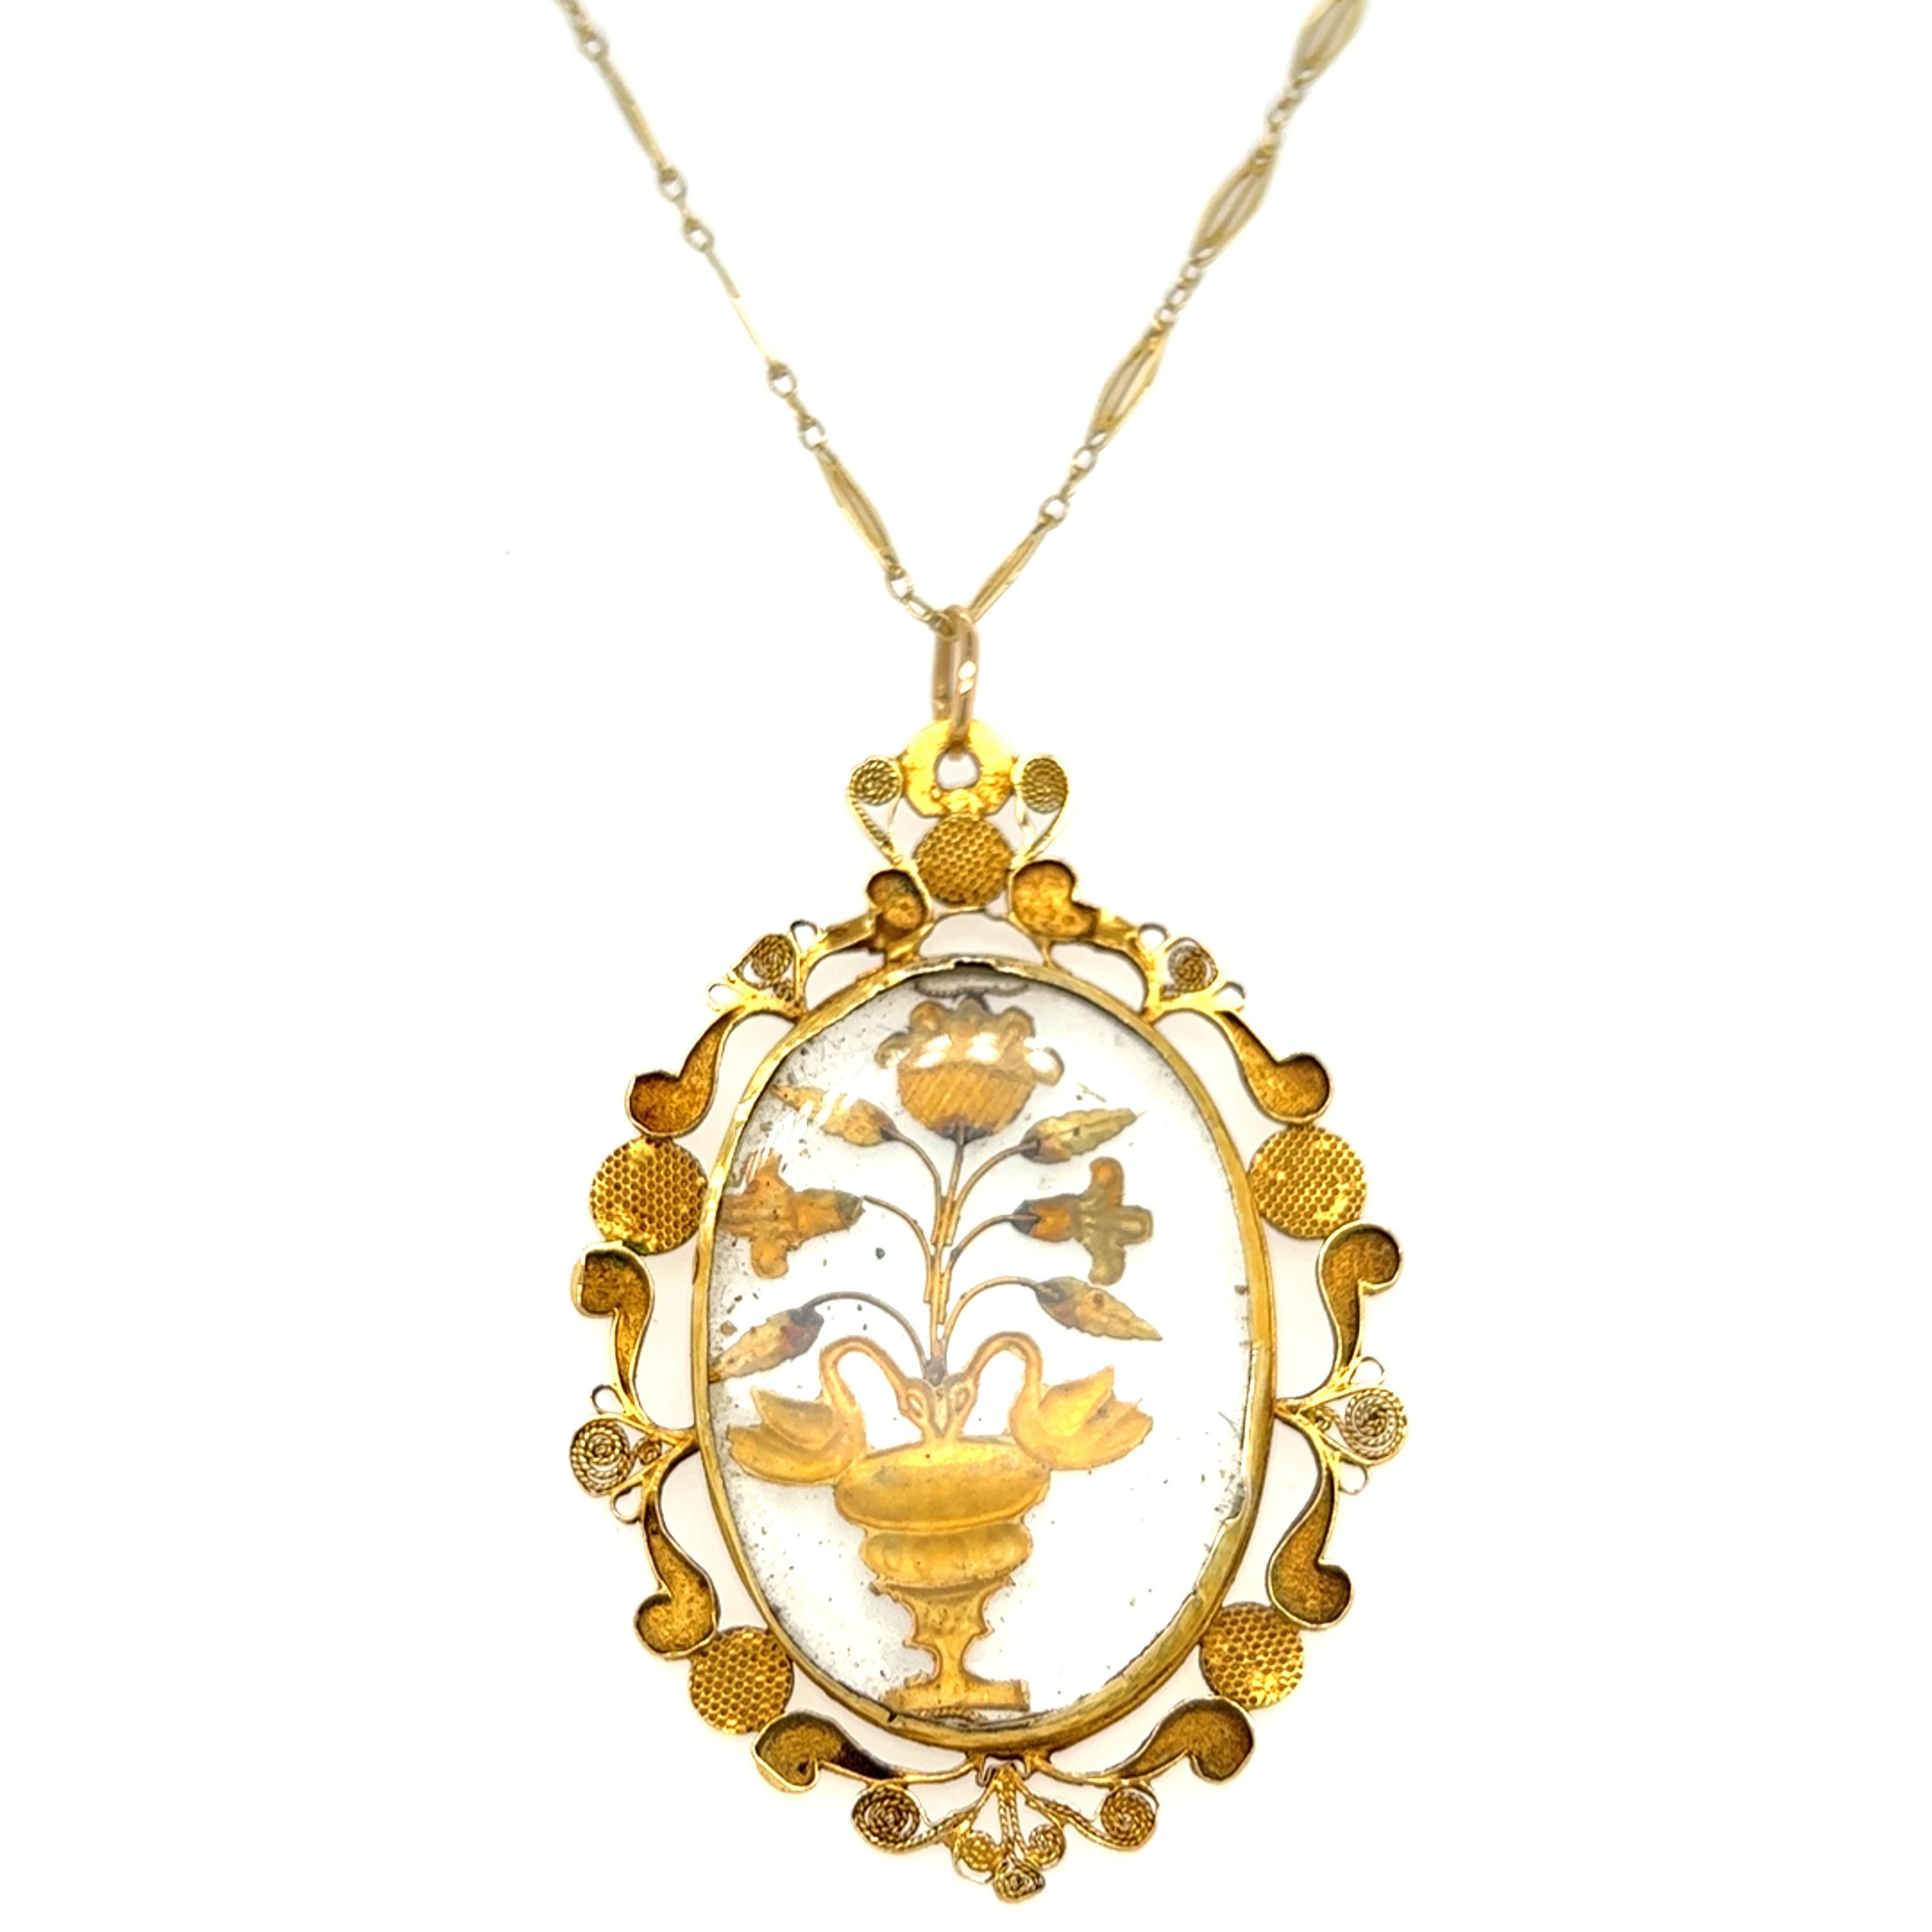 One 18 karat yellow gold oval Victorian locket style pendant necklace with transparent glass and 18 karat yellow gold floral design, assembled to a handmade 18 karat yellow gold chain measuring 18 inches long complete with a spring ring clasp. The